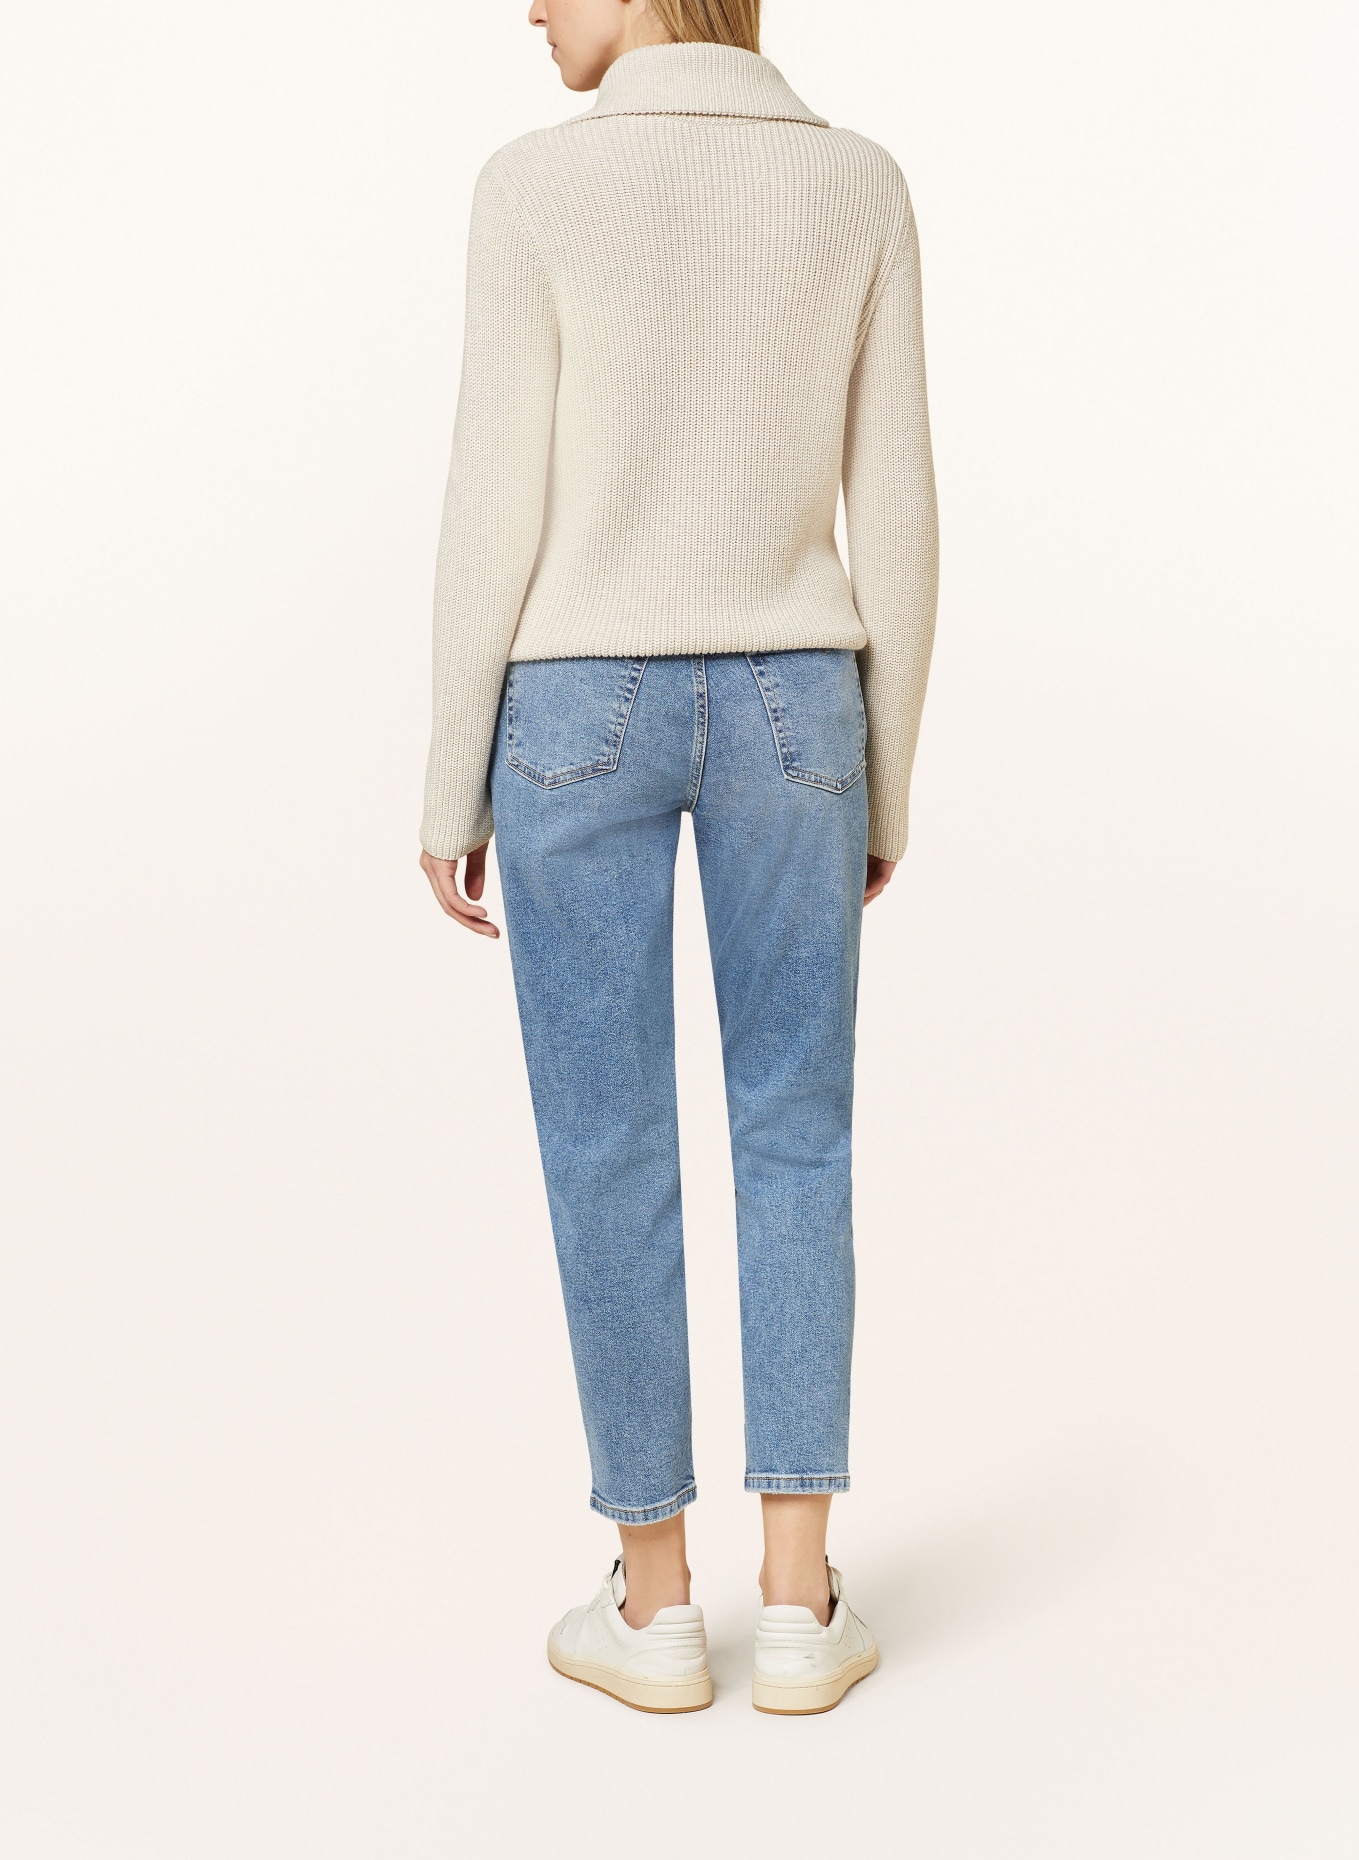 Marc O'Polo 7/8 jeans MALA, Color: 037 Mid authentic wash with grindi (Image 3)